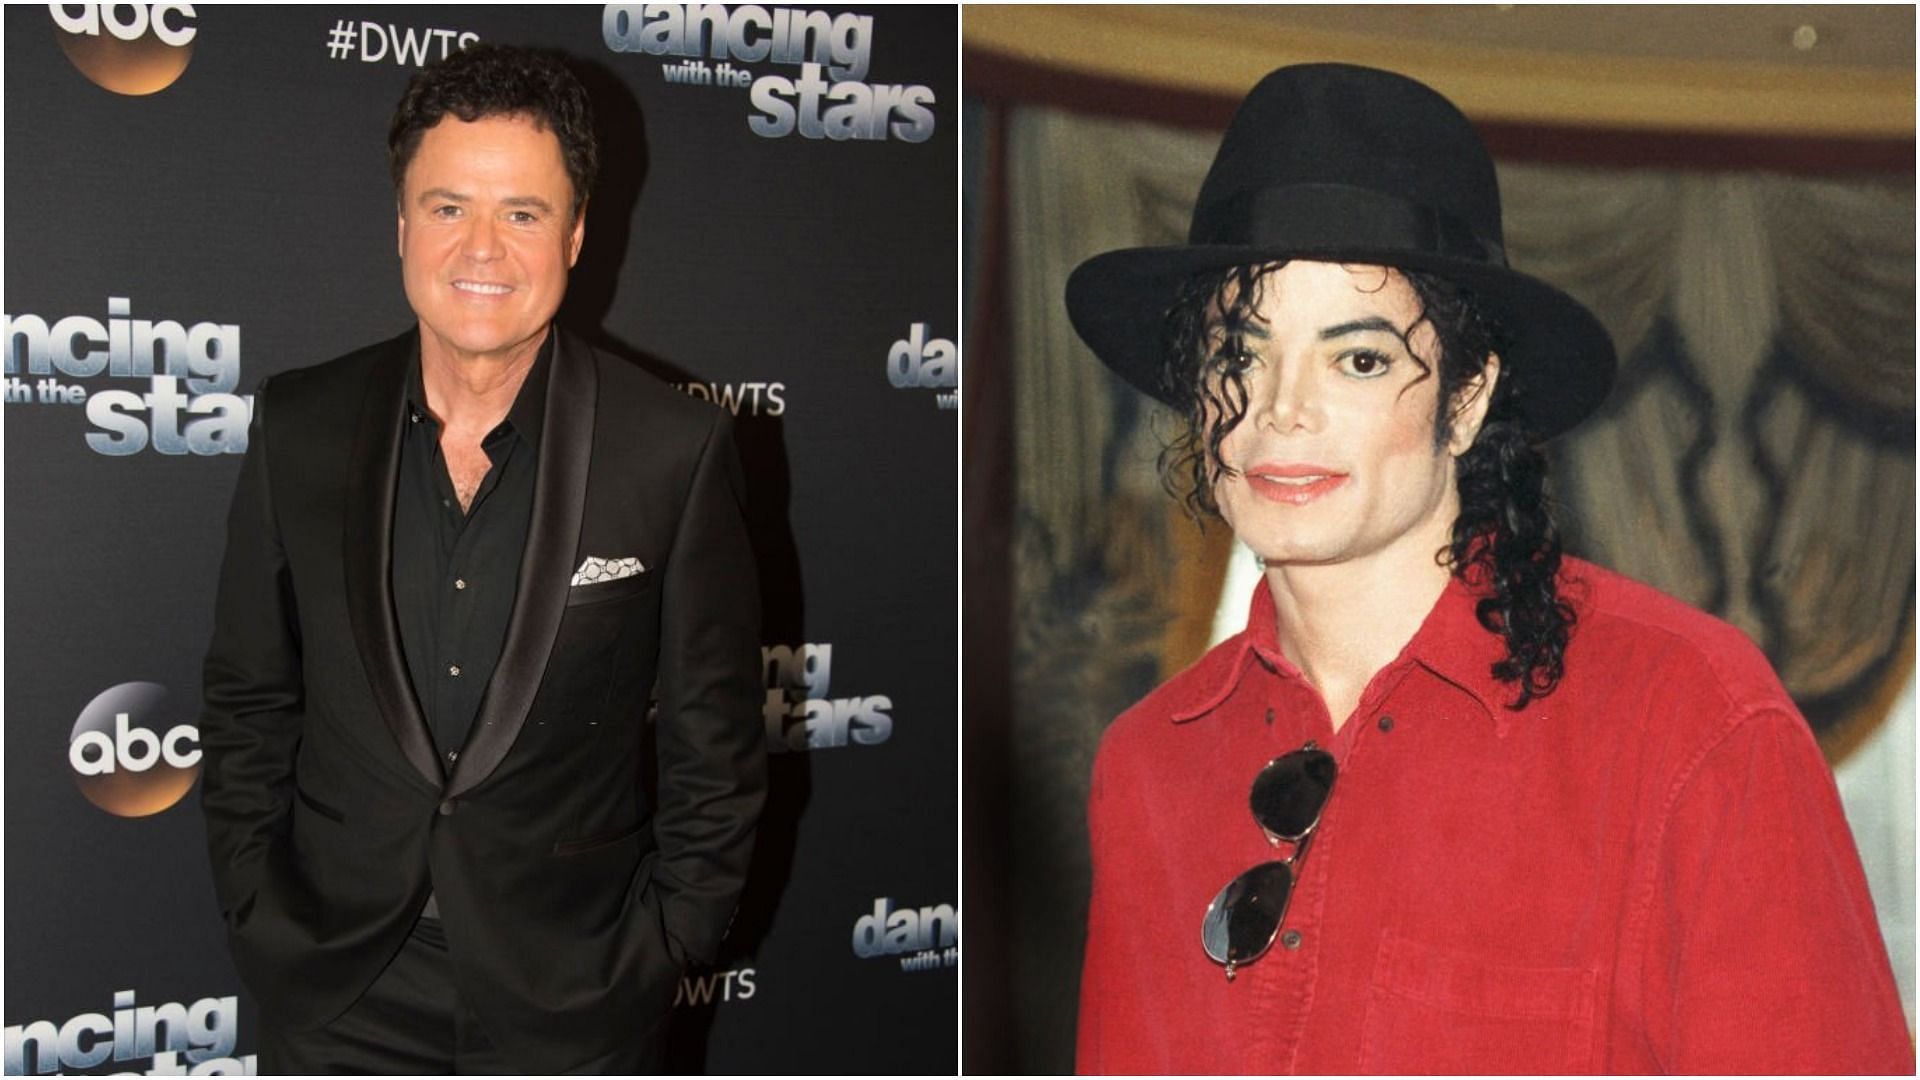 Donny Osmond recalled his last conversation with Michael Jackson (Images via Eric McCandless and Phil Dent/Getty Images)